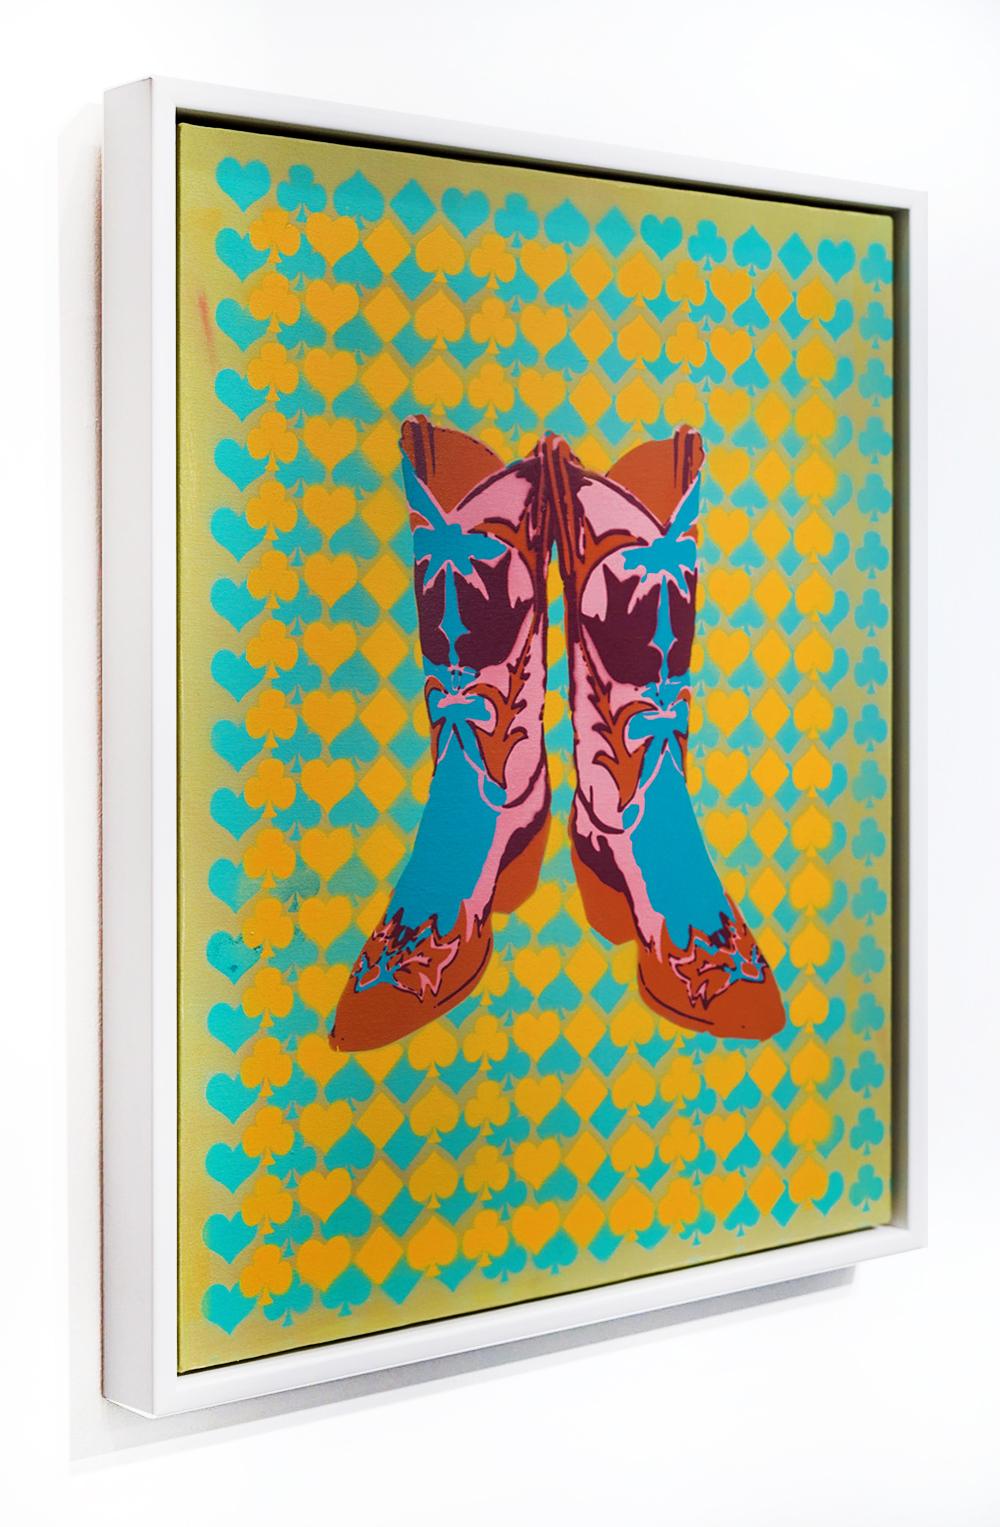 Woodstock Boot (Blue/Pink/Brown) - Contemporary Painting by Gamuret